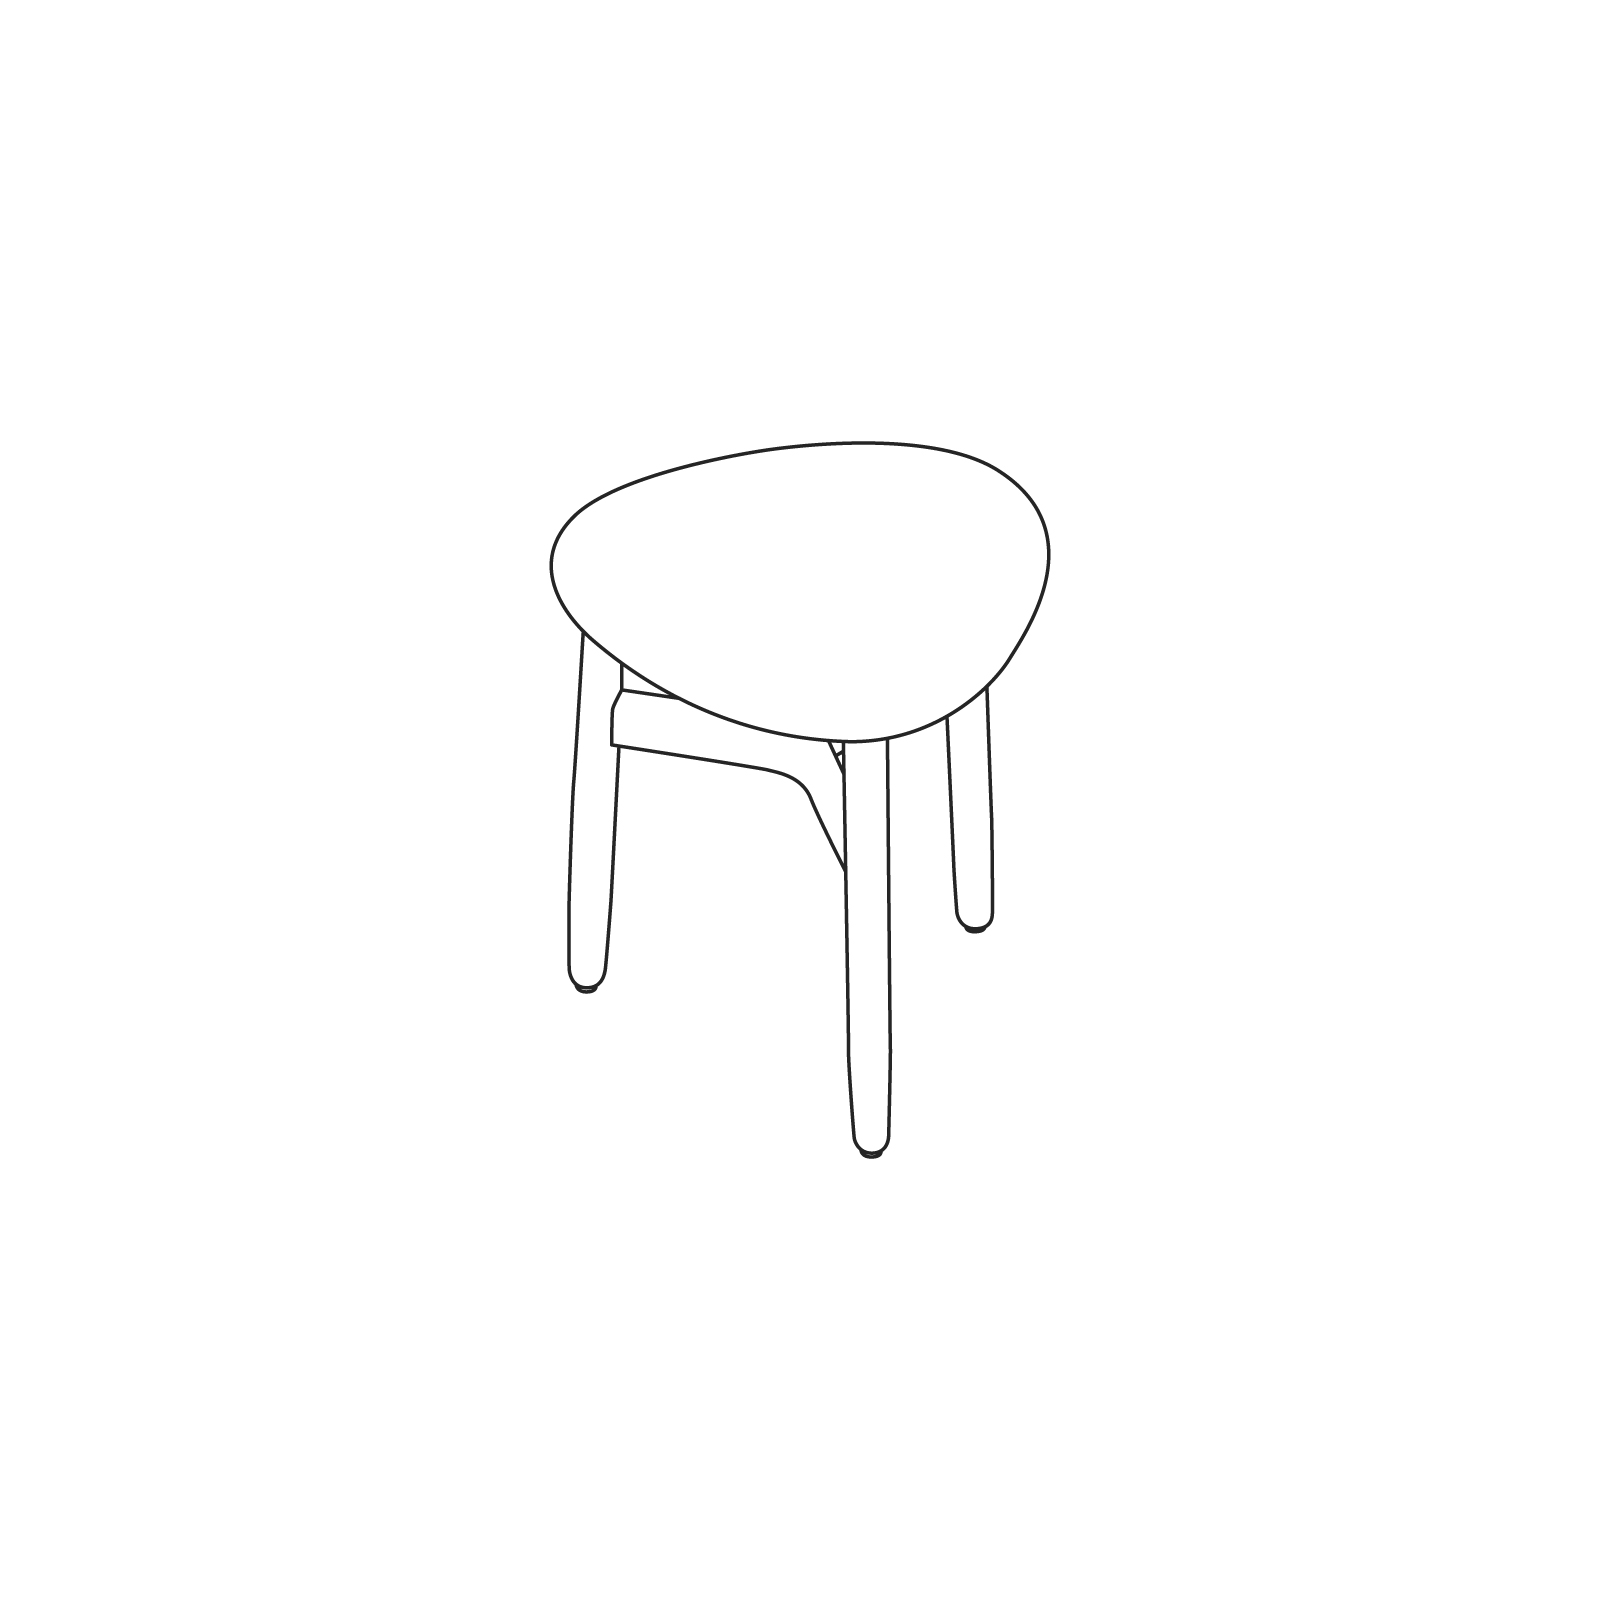 A line drawing - Crosshatch Outdoor Side Table–Trilobe